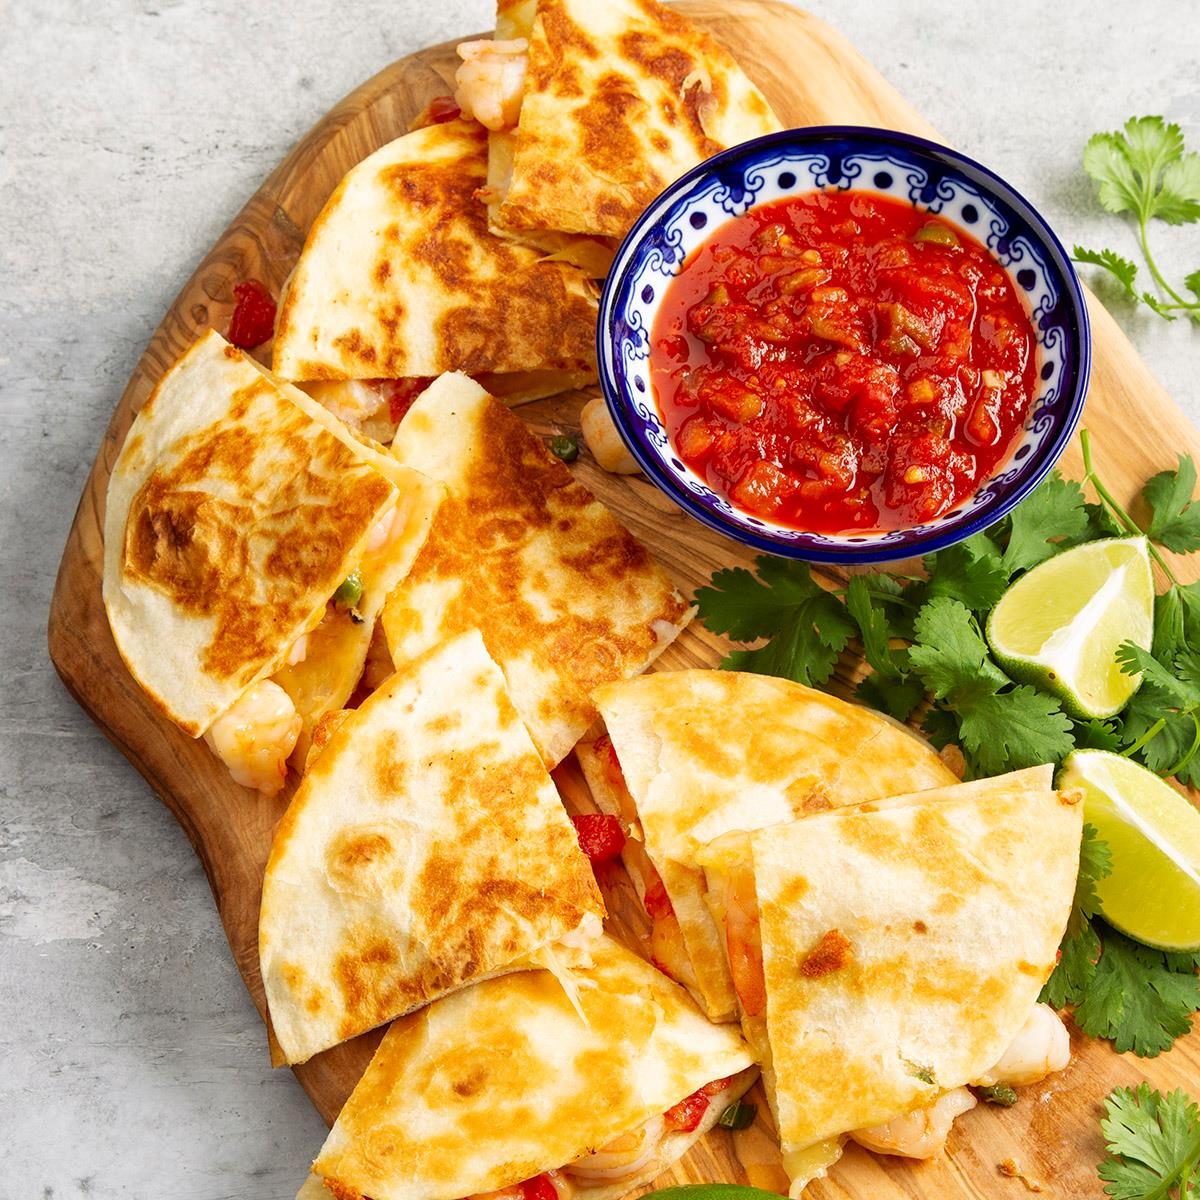 <p>It takes less than 10 minutes to cook up these spicy, cheesy shrimp quesadillas. To save even more time, use cooked shrimp instead of raw.</p> <div class="listicle-page__buttons"> <div class="listicle-page__cta-button"><a href='https://www.tasteofhome.com/recipes/shrimp-quesadilla/'>Go to Recipe</a></div> </div>